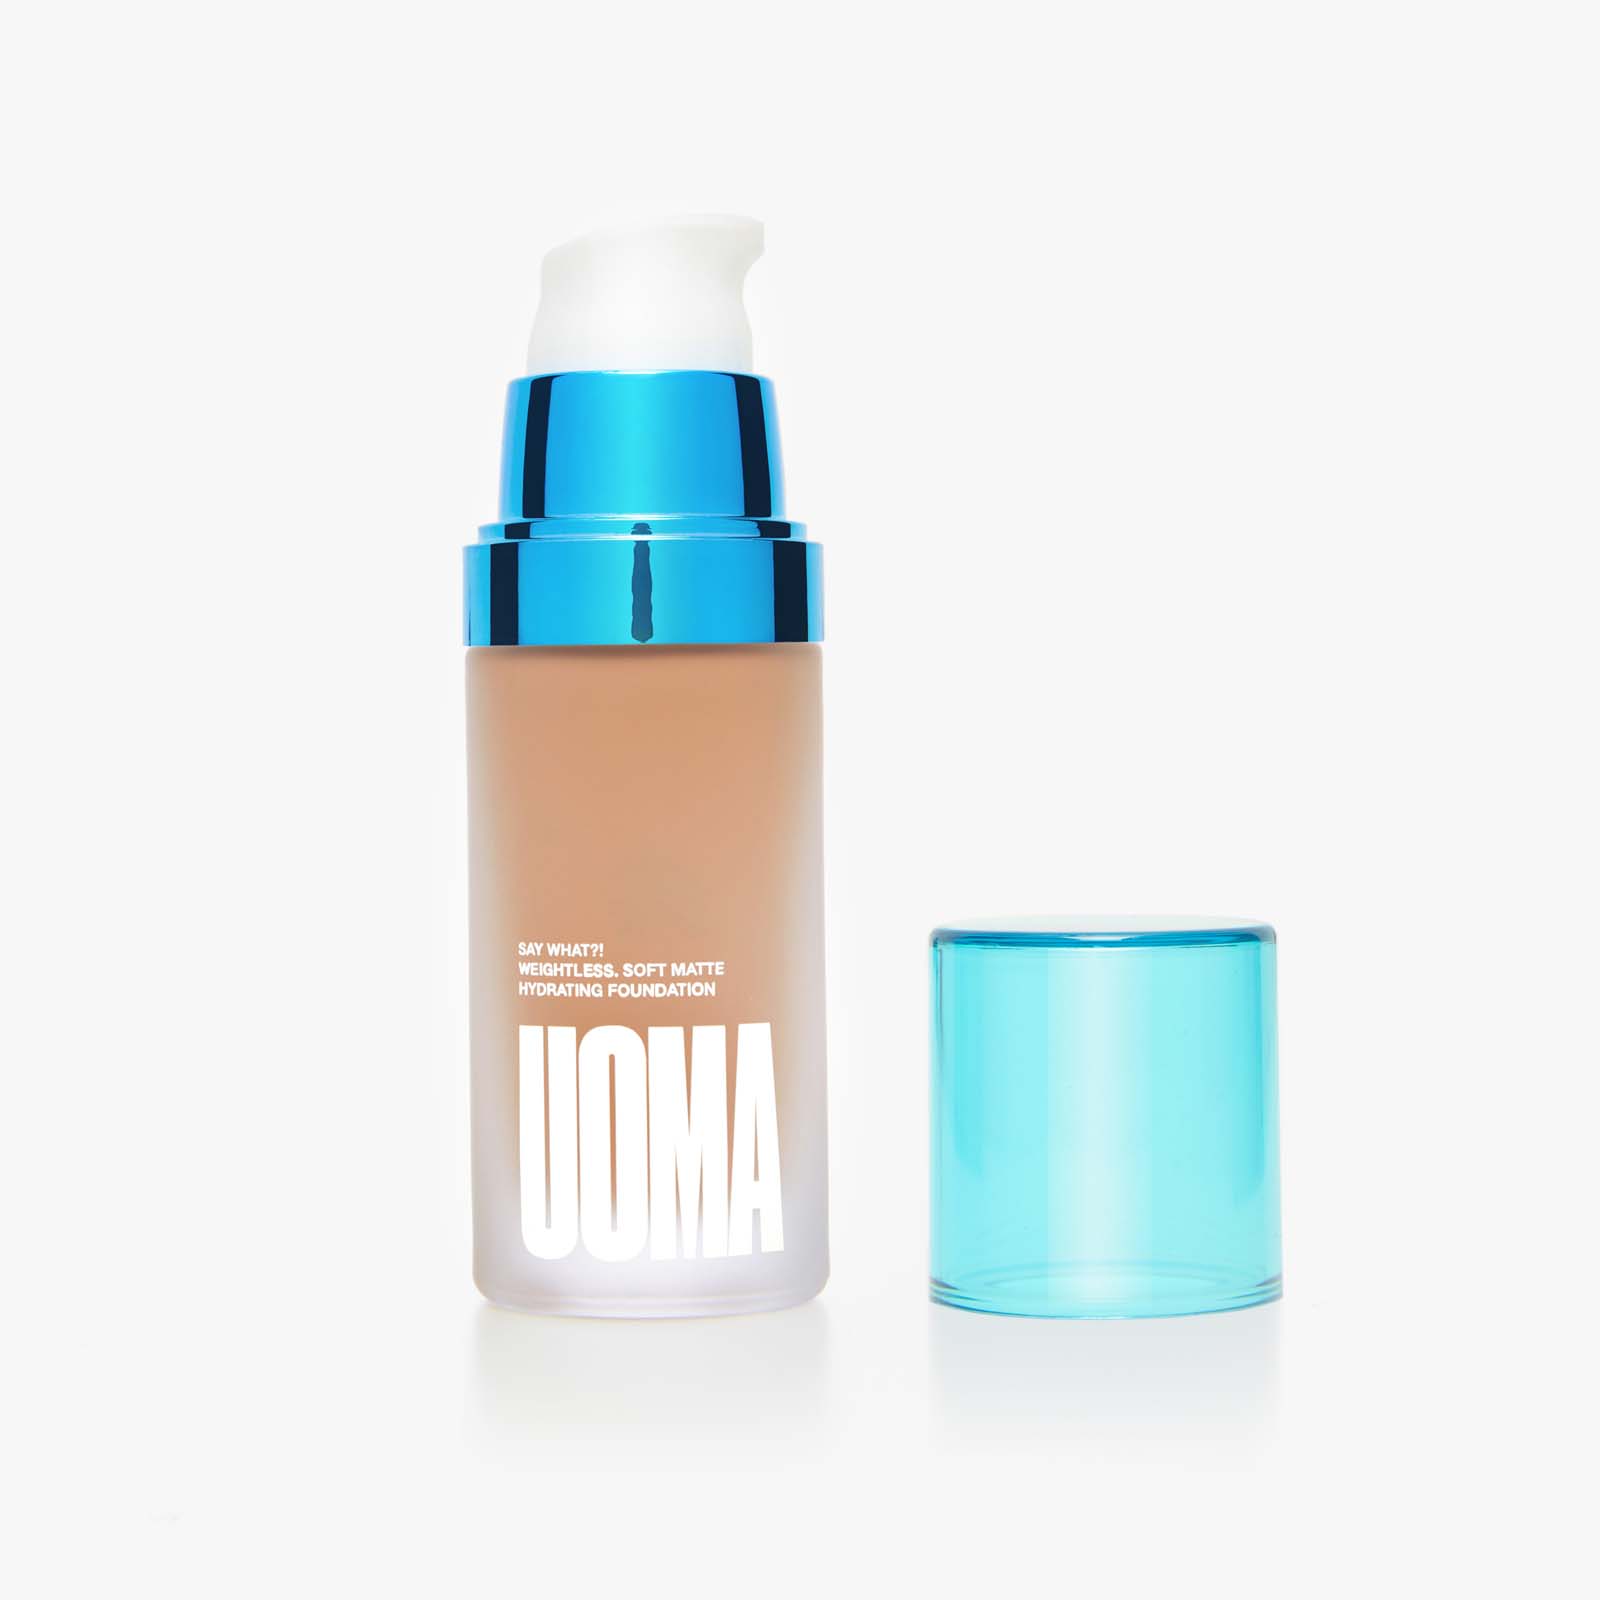 Uoma Beauty Say What?! Weightless Soft Matte Hydrating Foundation 30Ml Fair Lady T3C